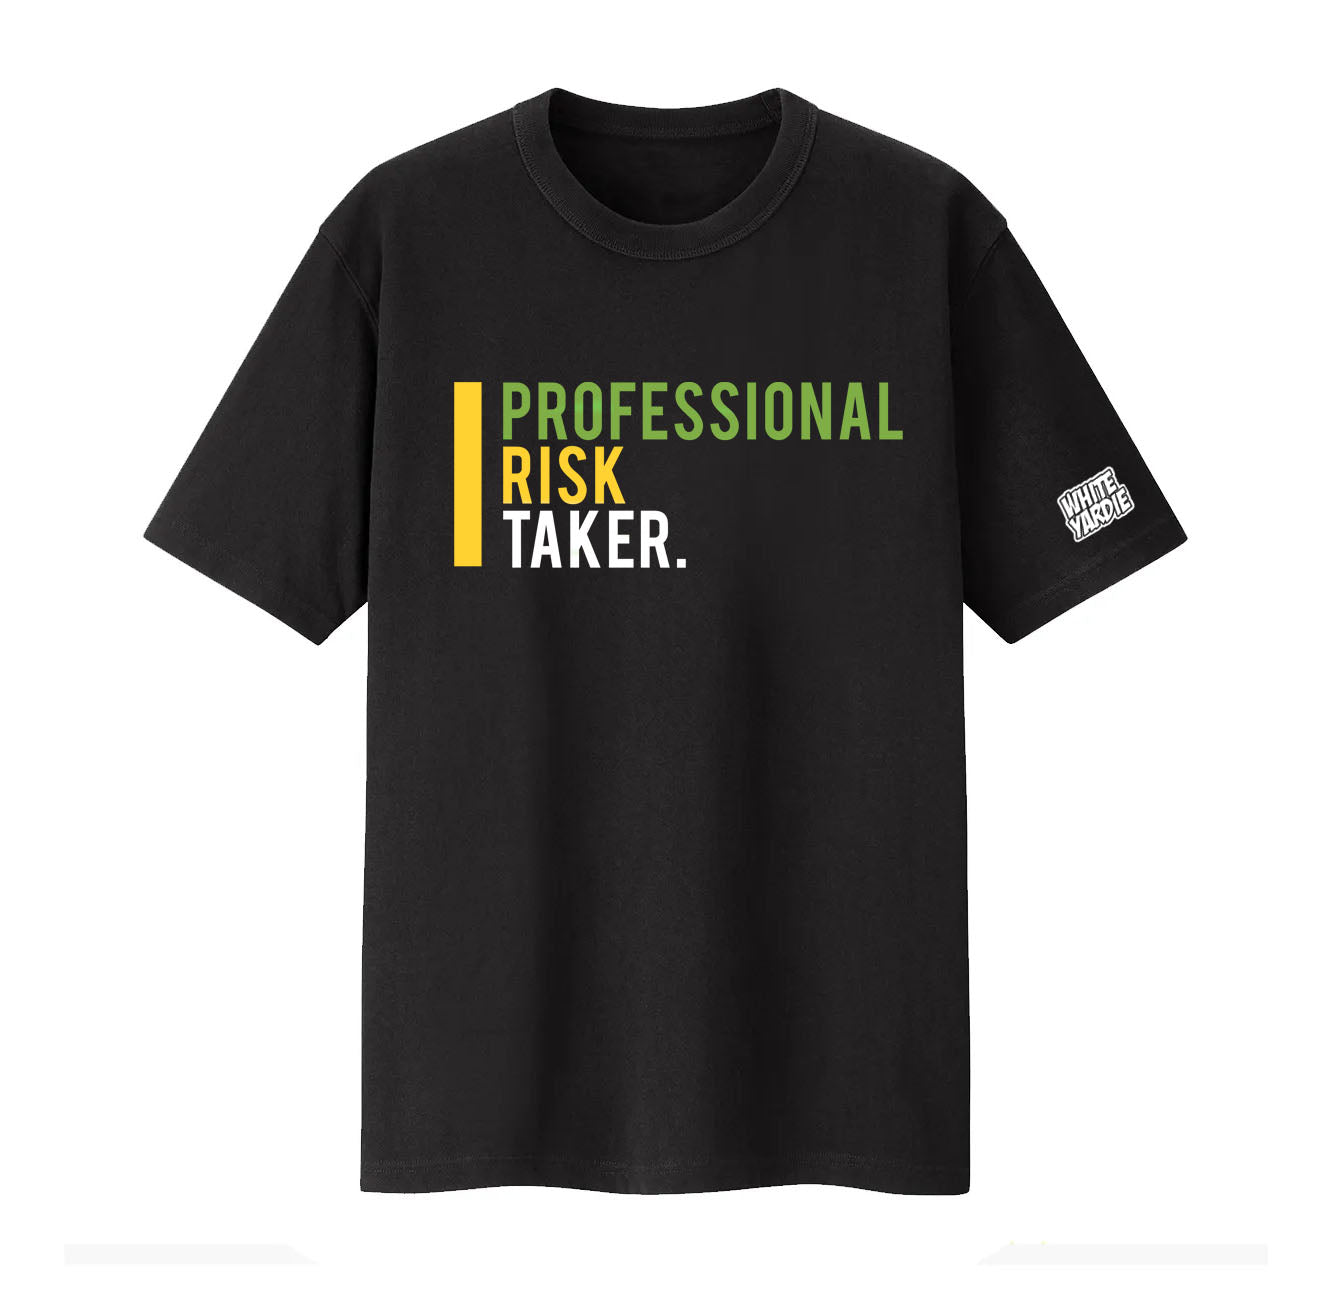 Project BOSS' "Professional RIsk Taker" Tee